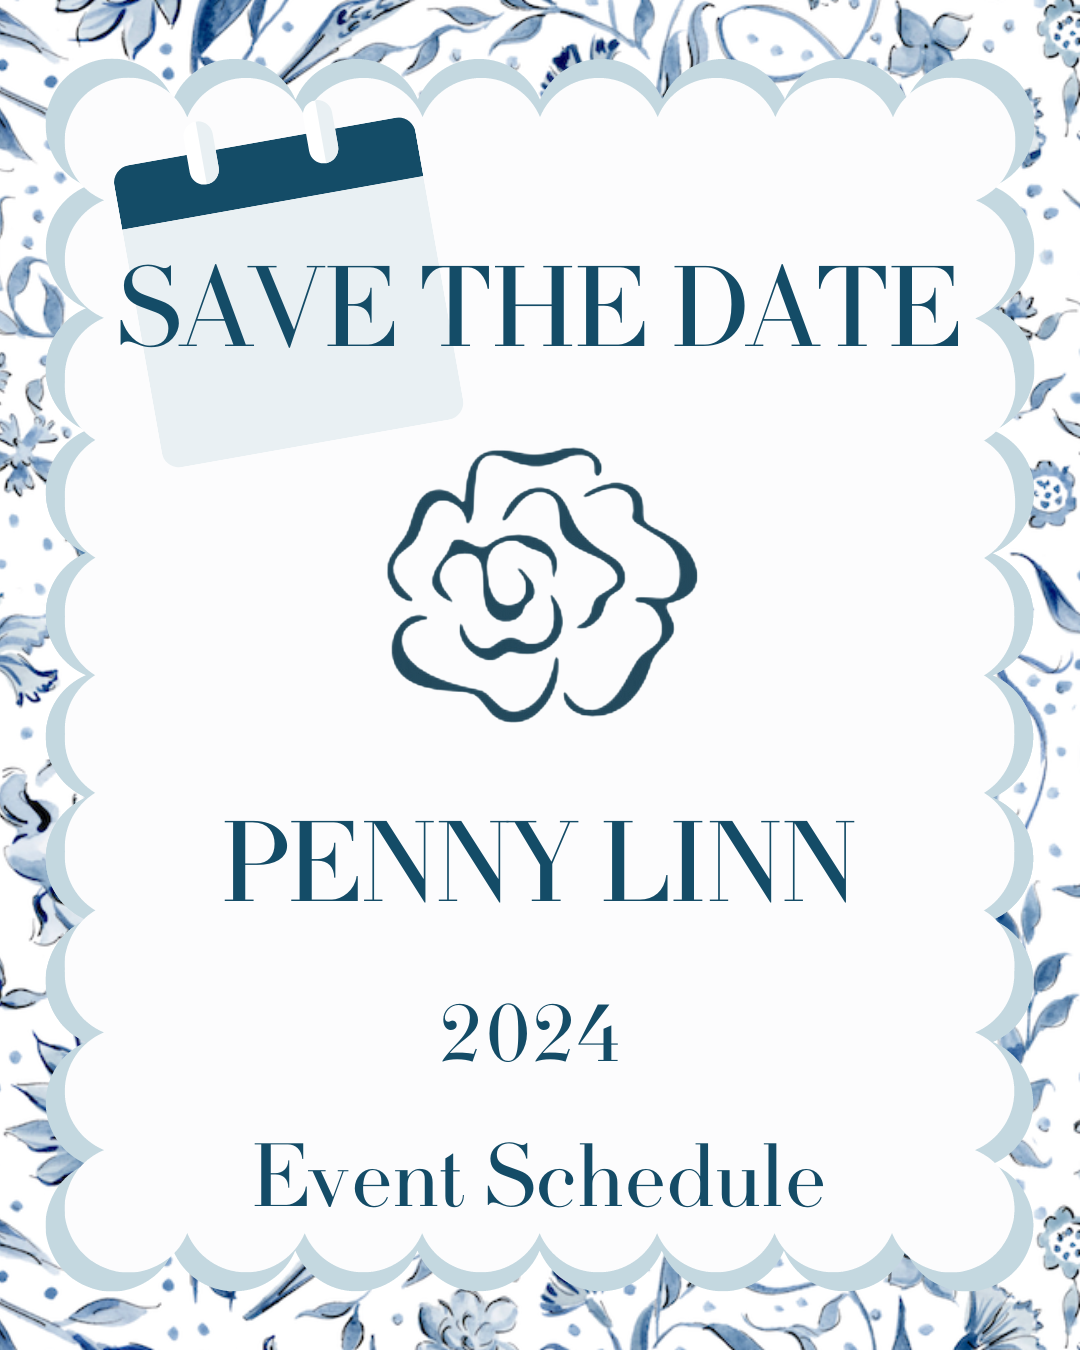 Save the Date Penny Linn 2024 Event Schedule